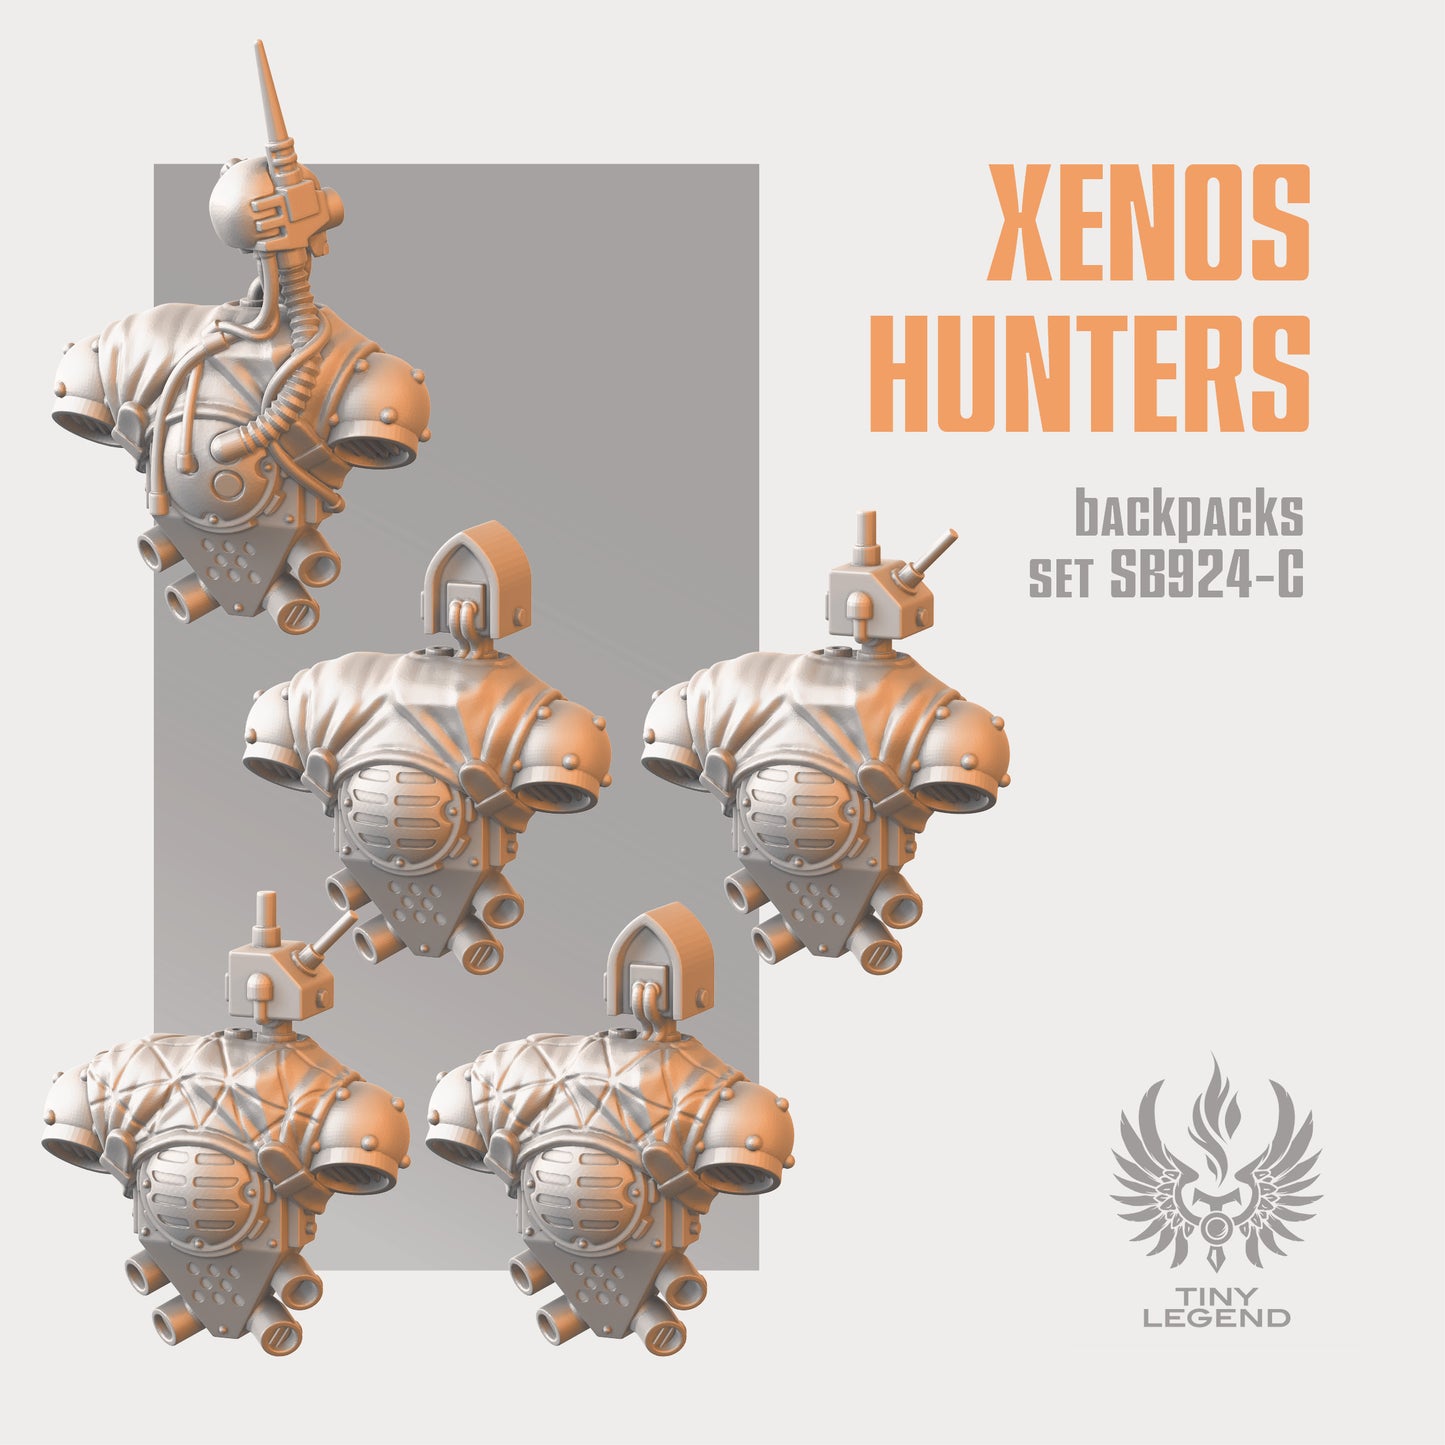 Xenos Hunters Reiver Backpack set 2